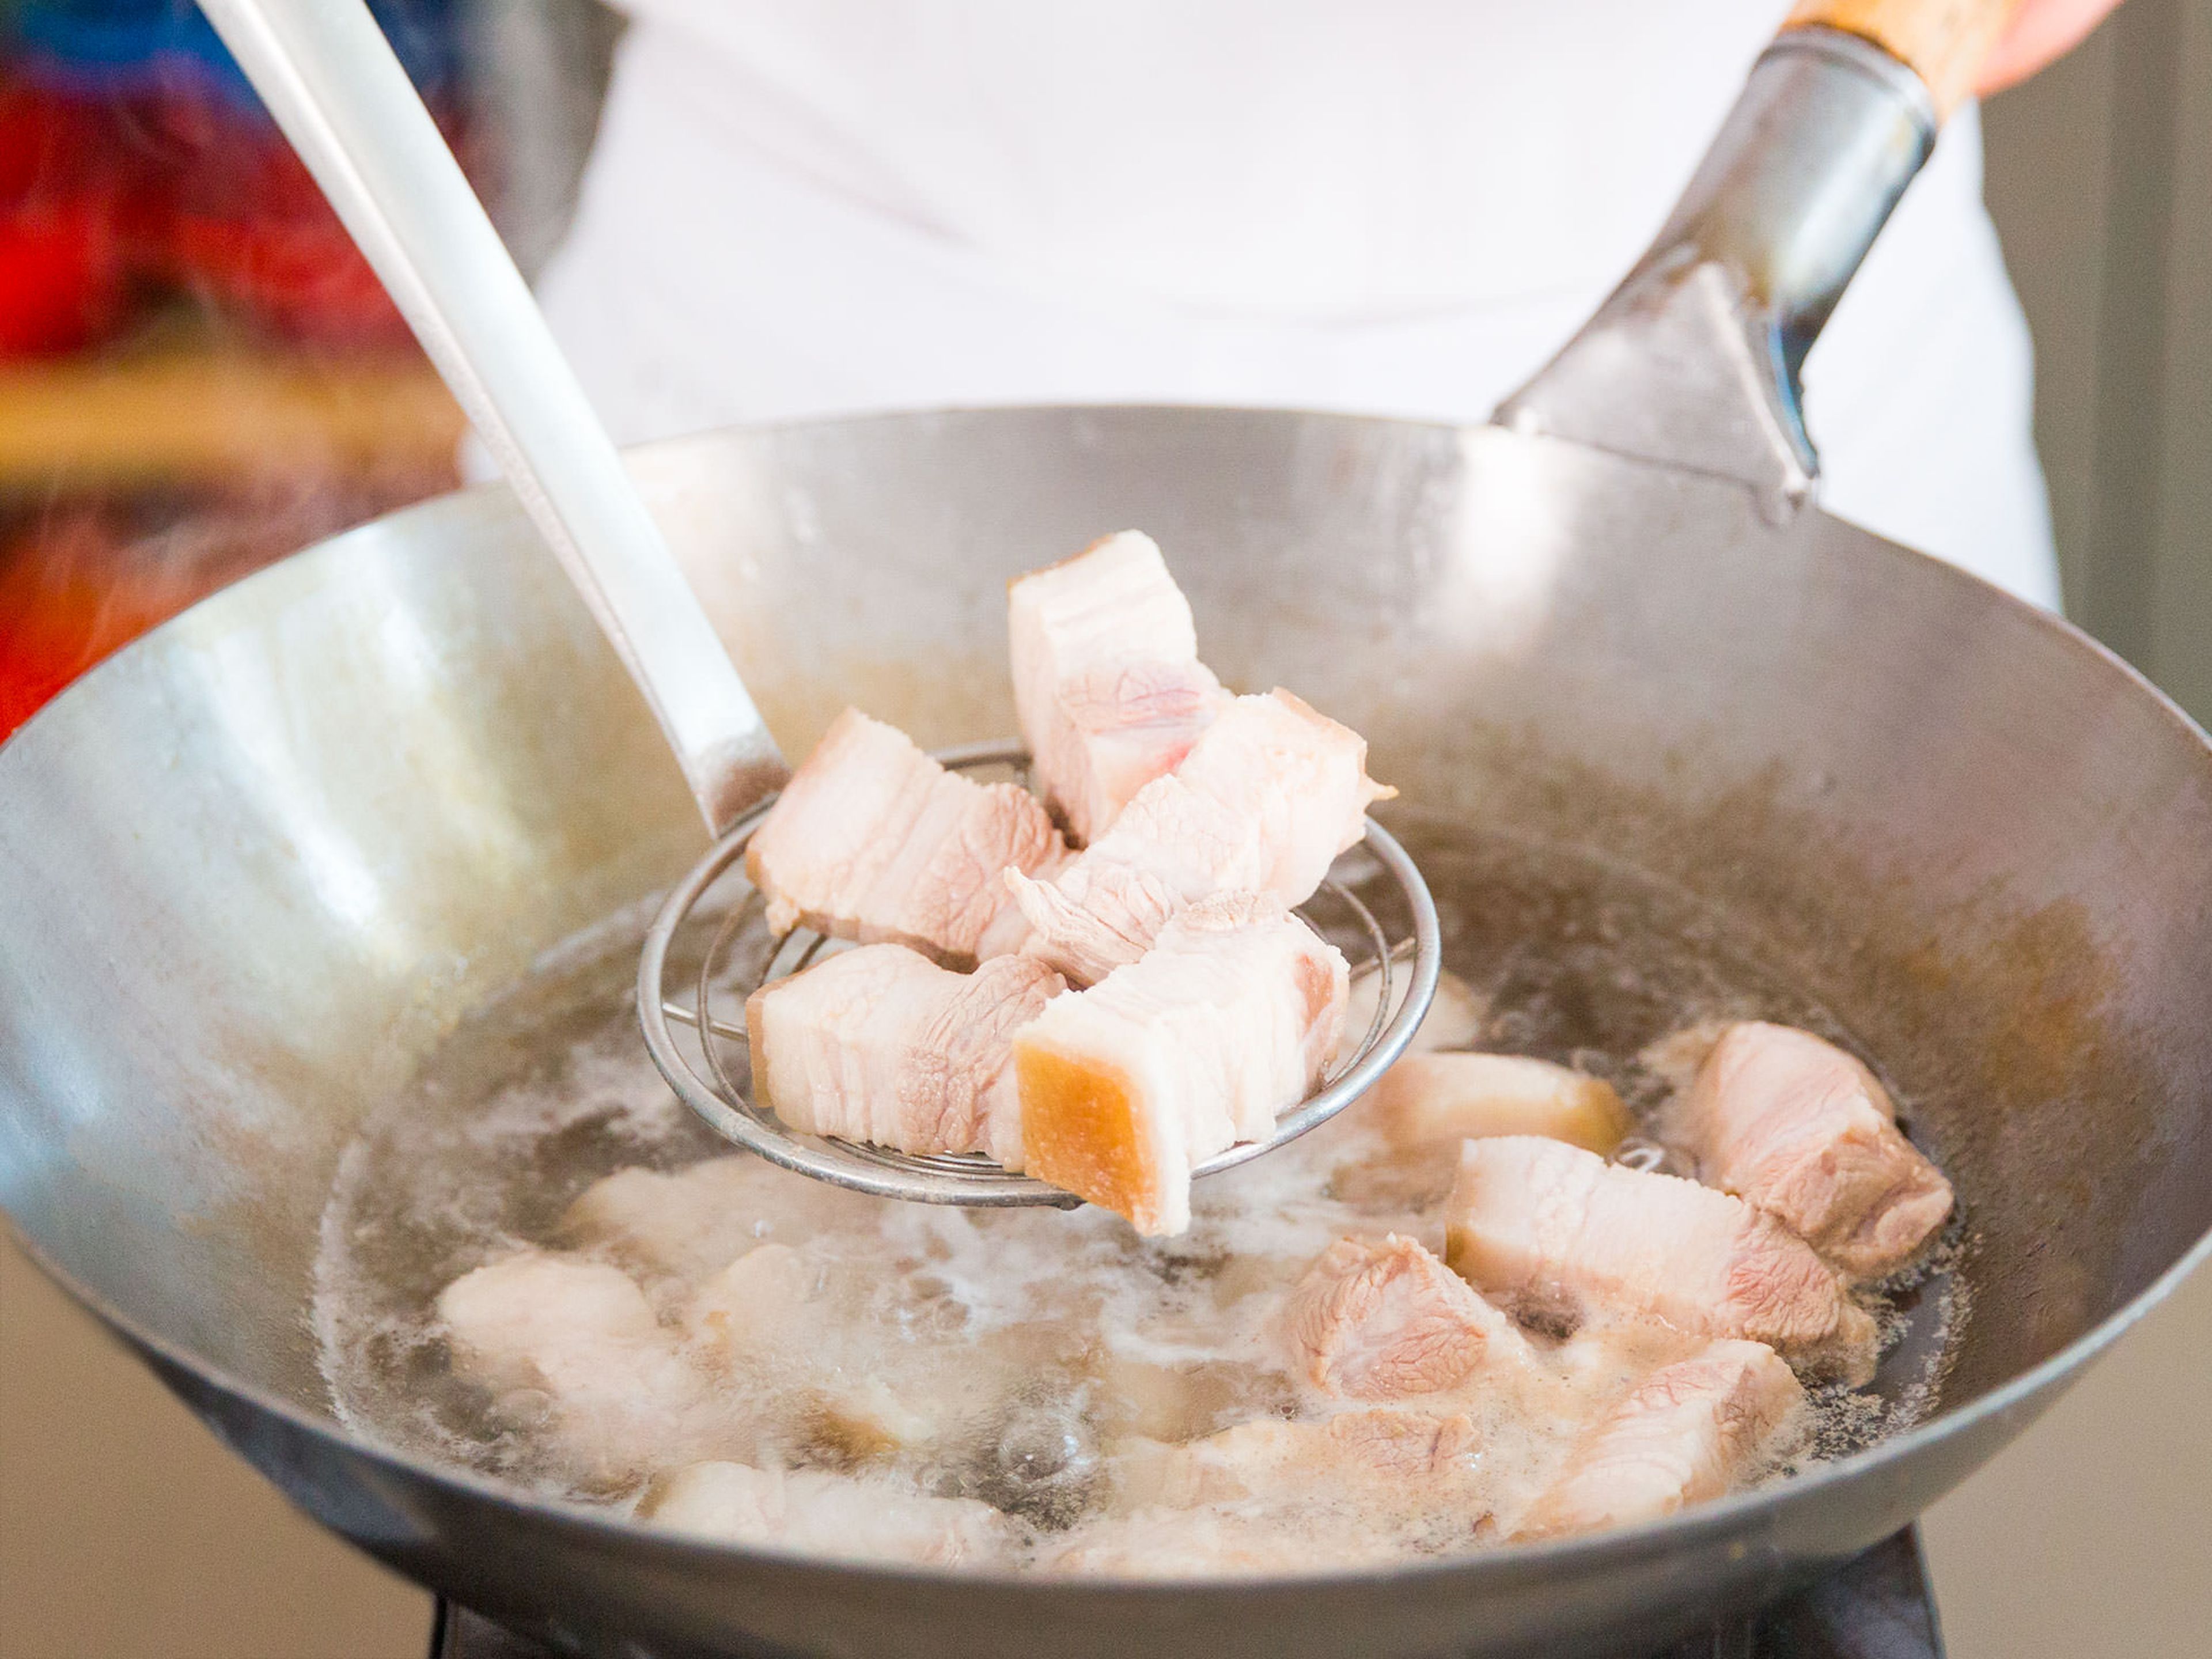 Fill wok one third of the way full with hot water. Place pork belly in water, bring to a boil, and cook for approx. 5 – 7 min. Strain and set aside.